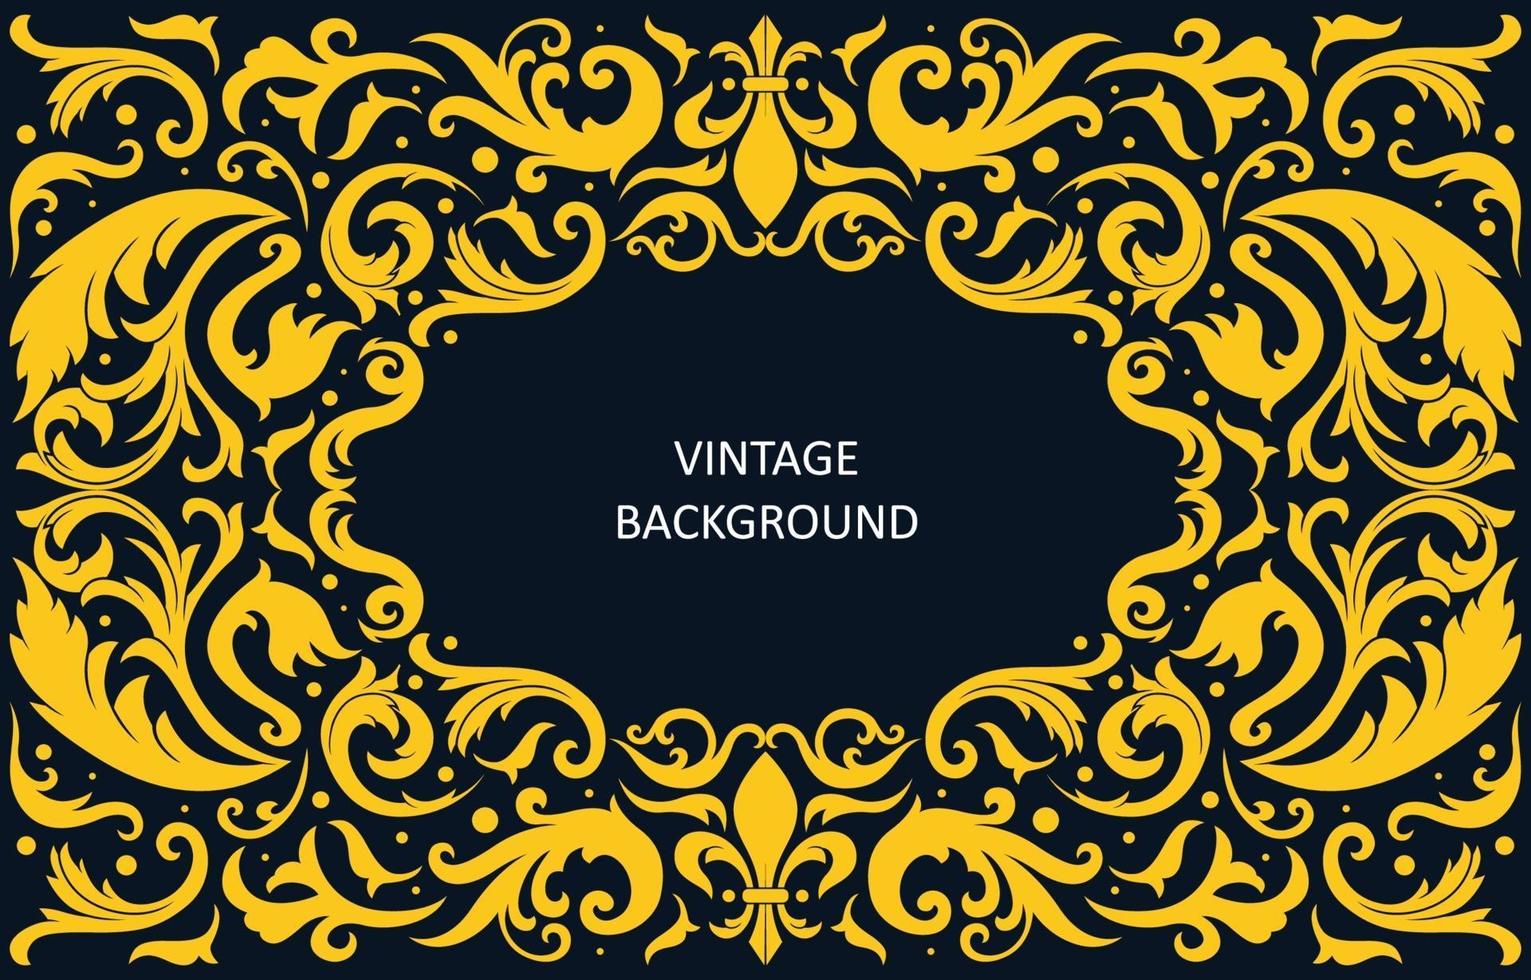 Vintage Background with Swirl Ornament vector